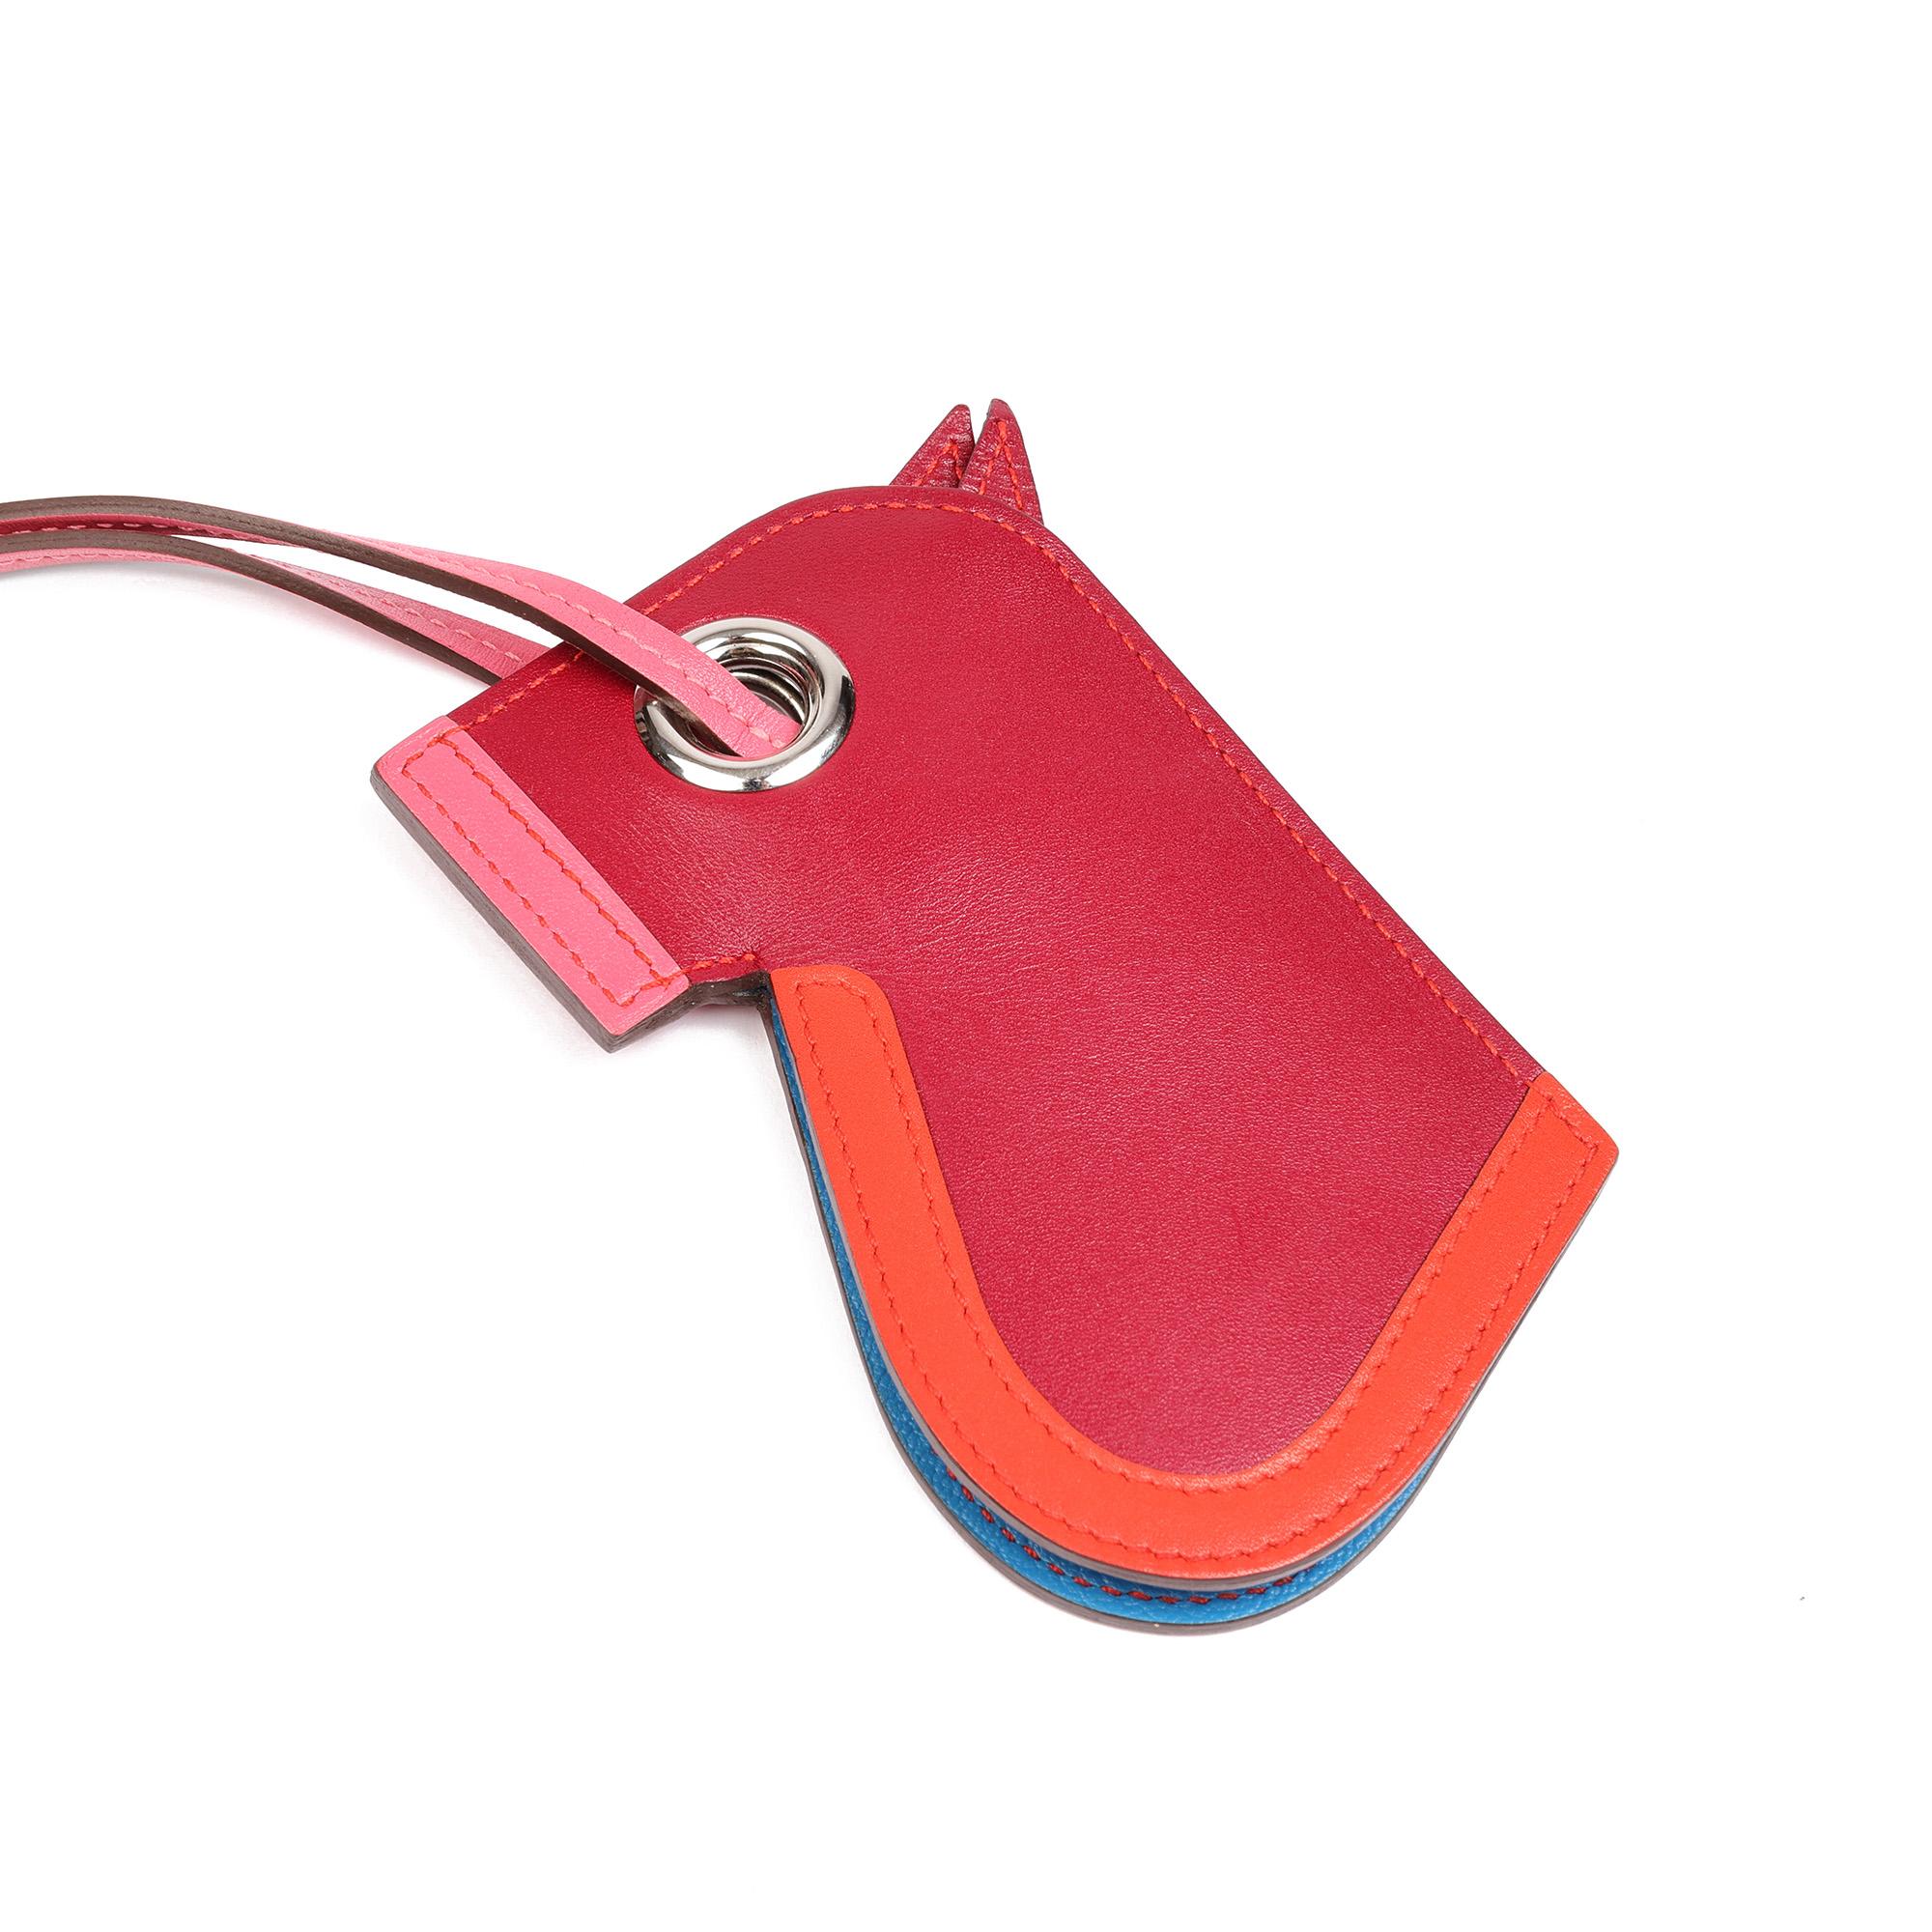 Hermès RUBIS, ORANGE POPPY & ROSE AZALEE TADELAKT LEATHER CAMAIL KEYHOLDER CHARM

CONDITION NOTES
The exterior is excellent condition with light signs of use.
The interior is in excellent condition with light signs of use.
The hardware is in